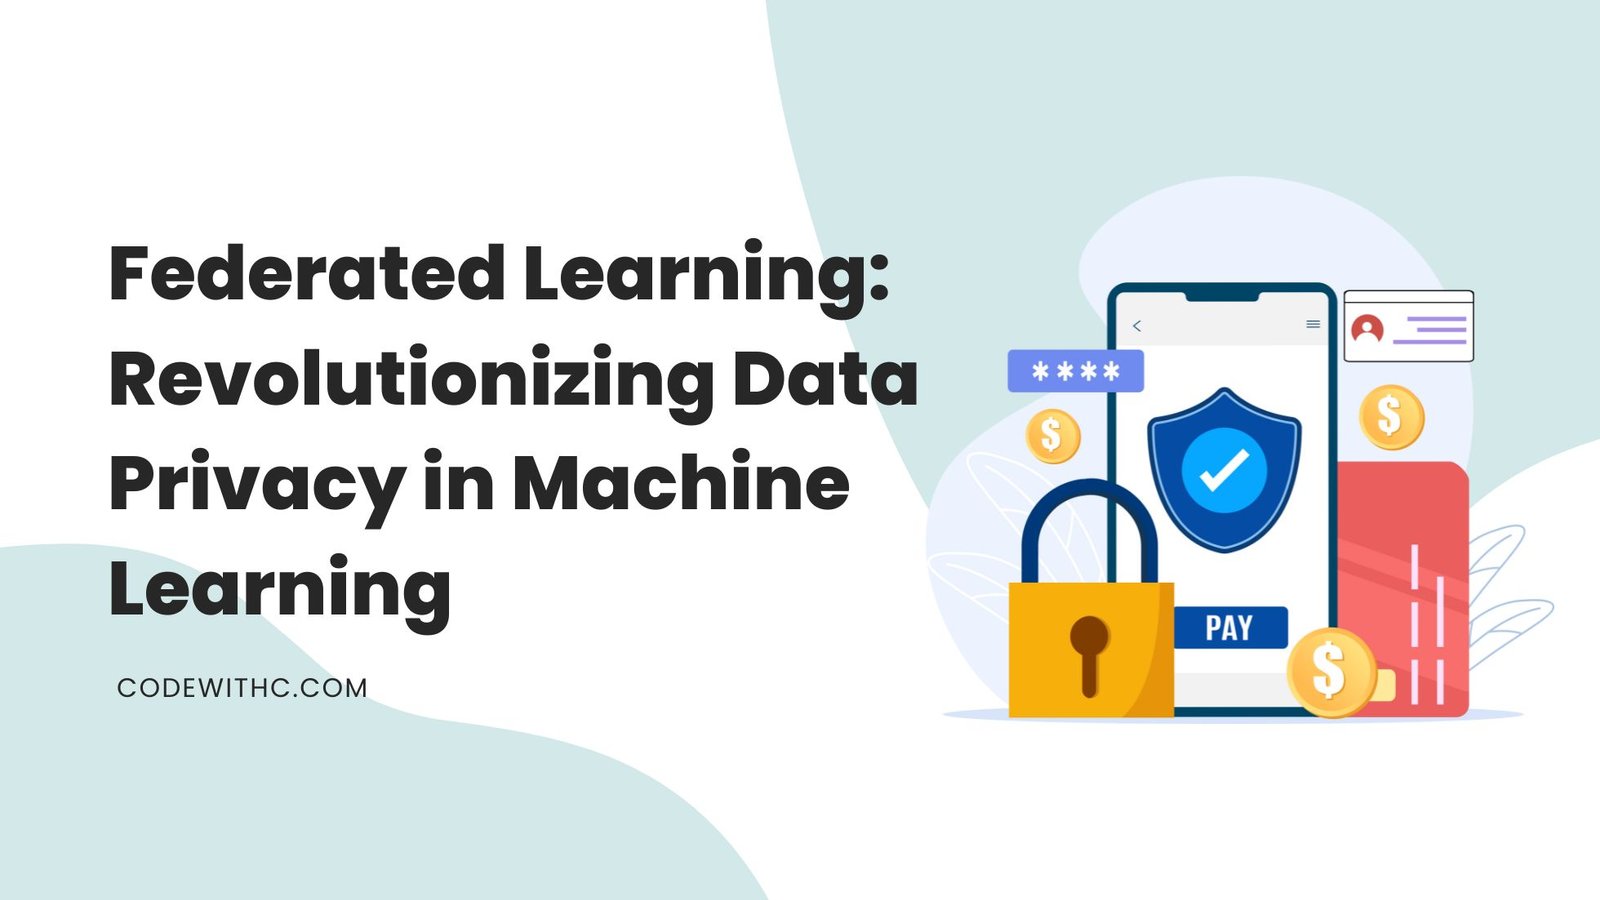 Federated Learning: Revolutionizing Data Privacy in Machine Learning